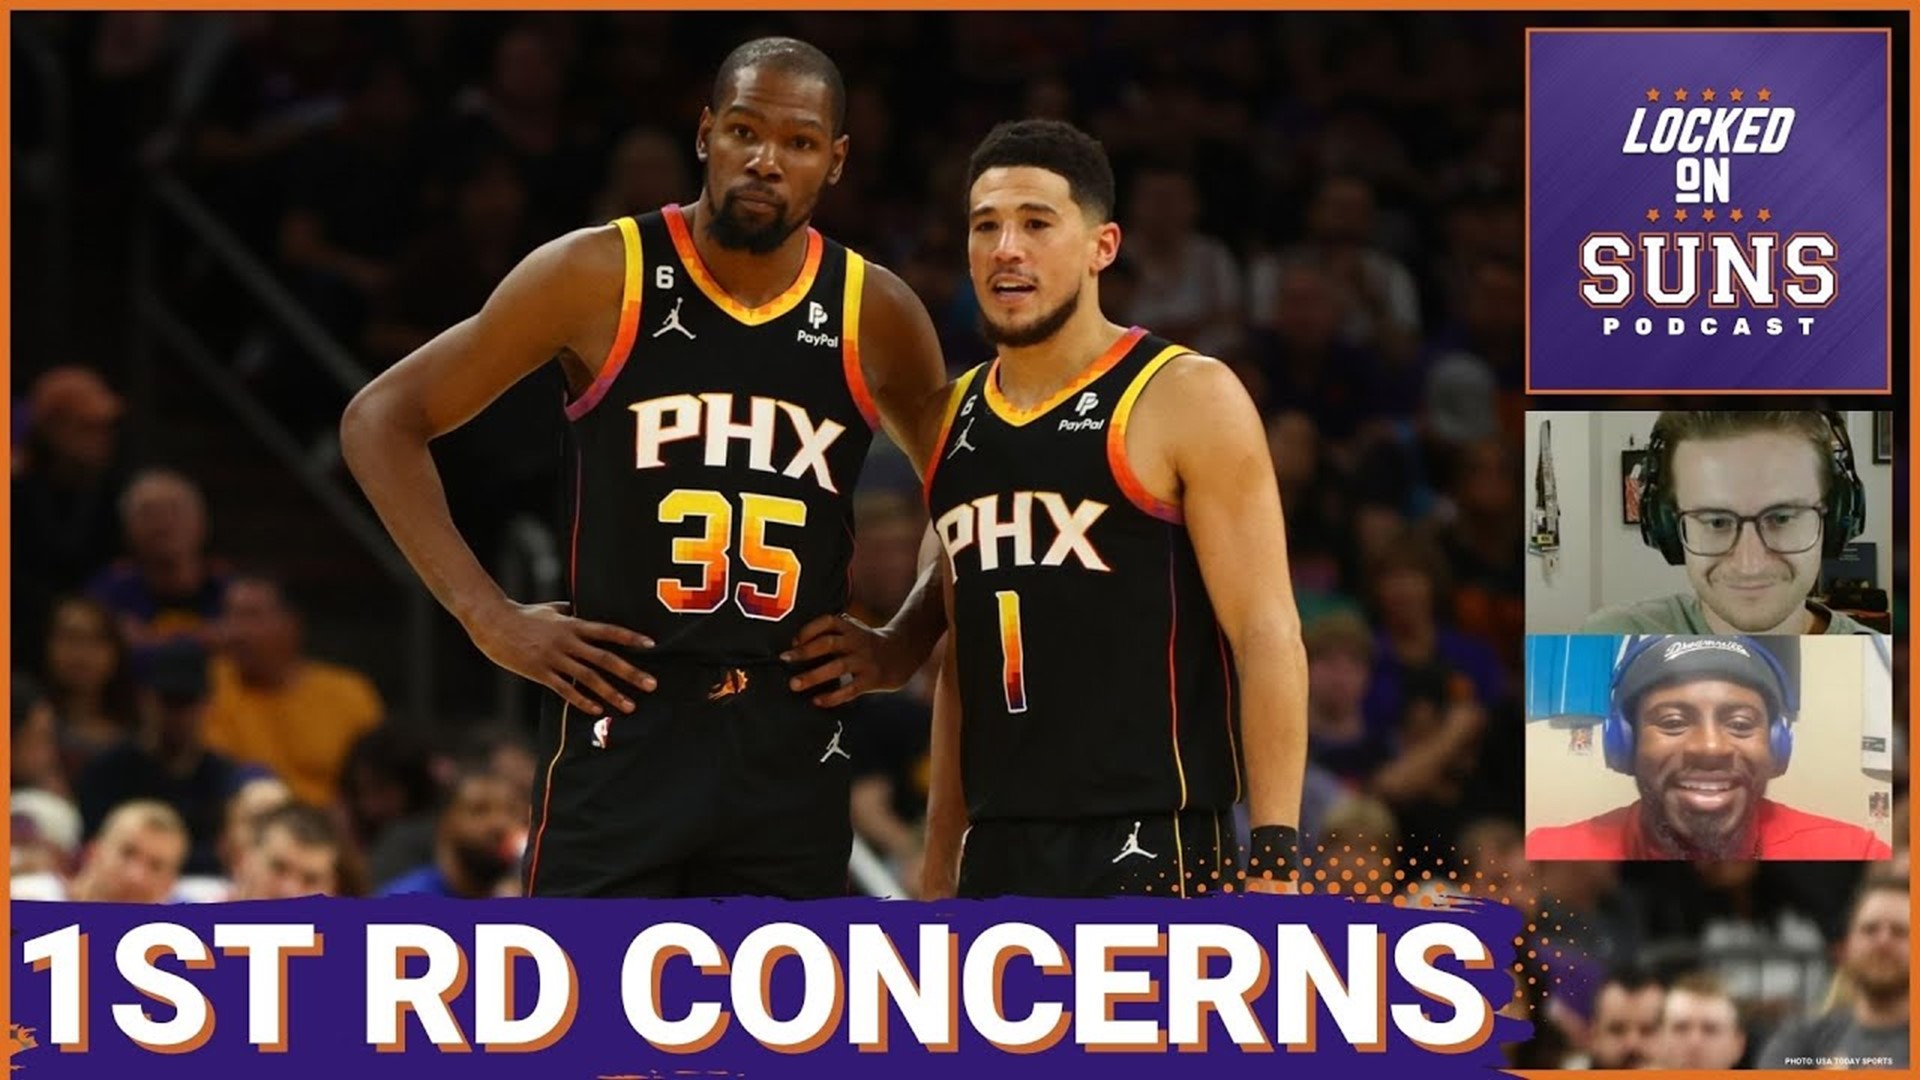 Where could Devin Booker, Kevin Durant and the Phoenix Suns slip up and fall to the Minnesota Timberwolves in the NBA playoffs?